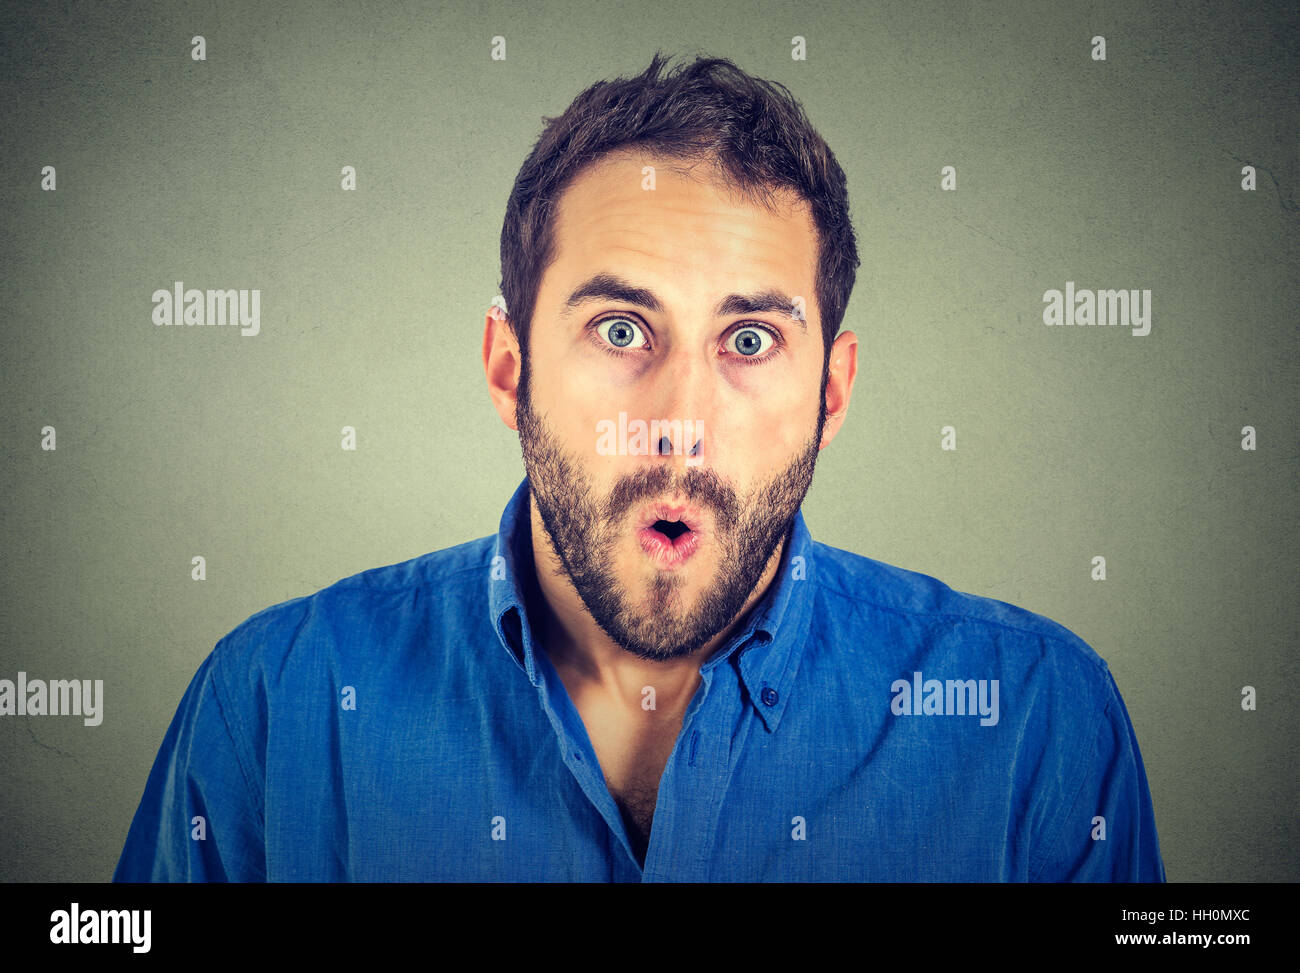 Shocked Man Isolated On Gray Wall Background Stock Photo Alamy